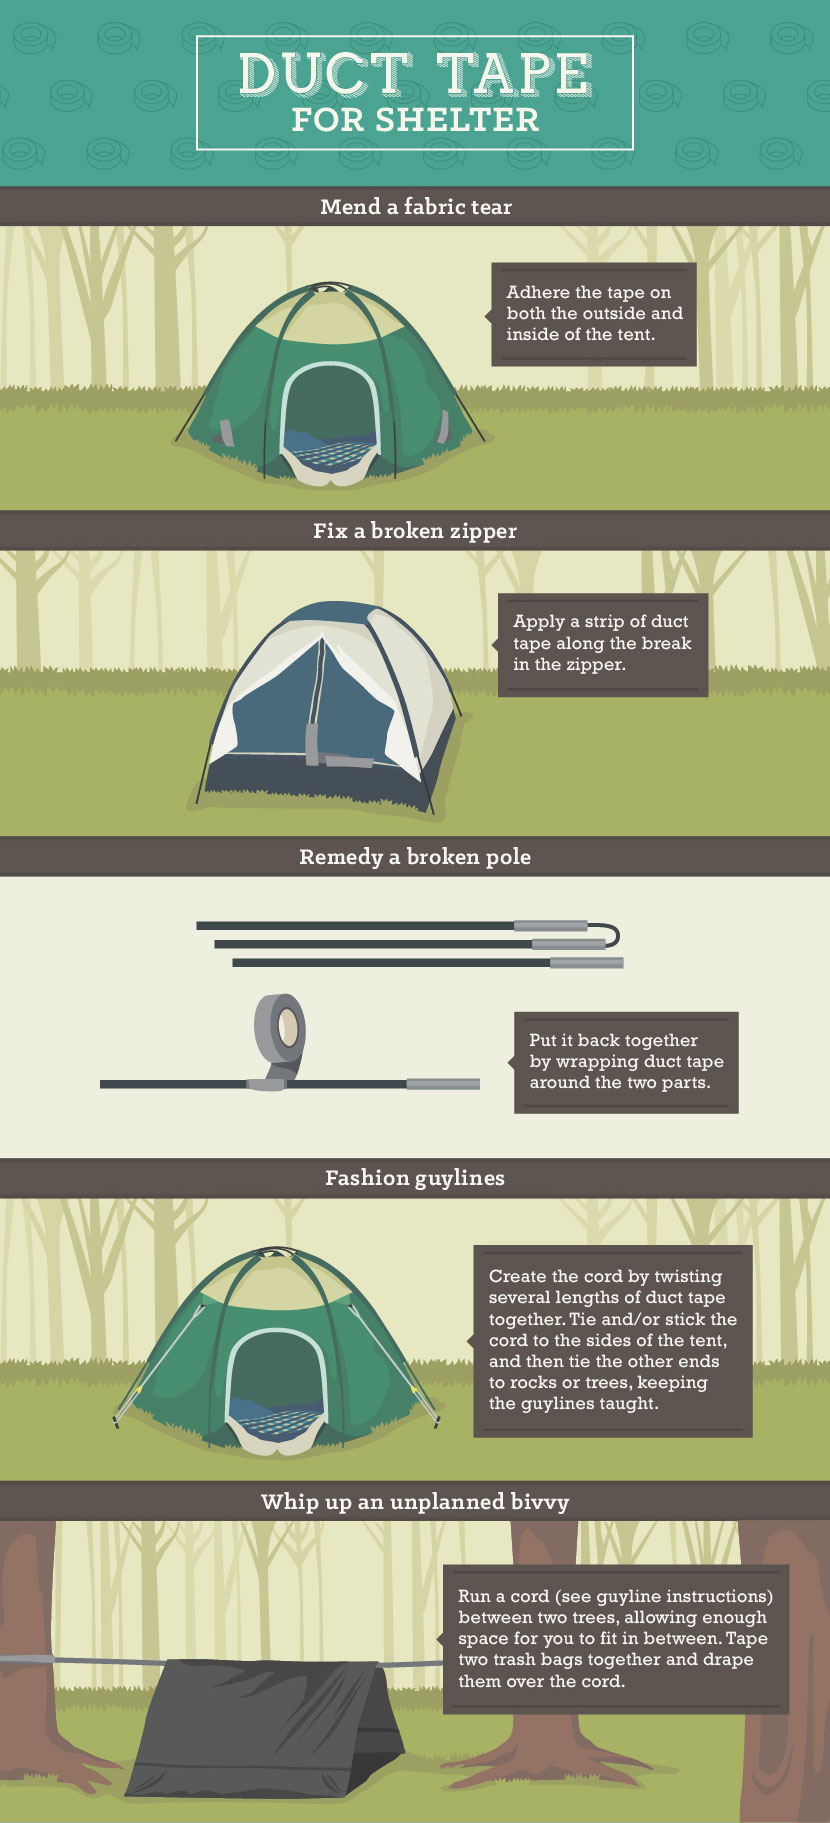 Duct Tape Guide - Using Duct Tape for Shelter